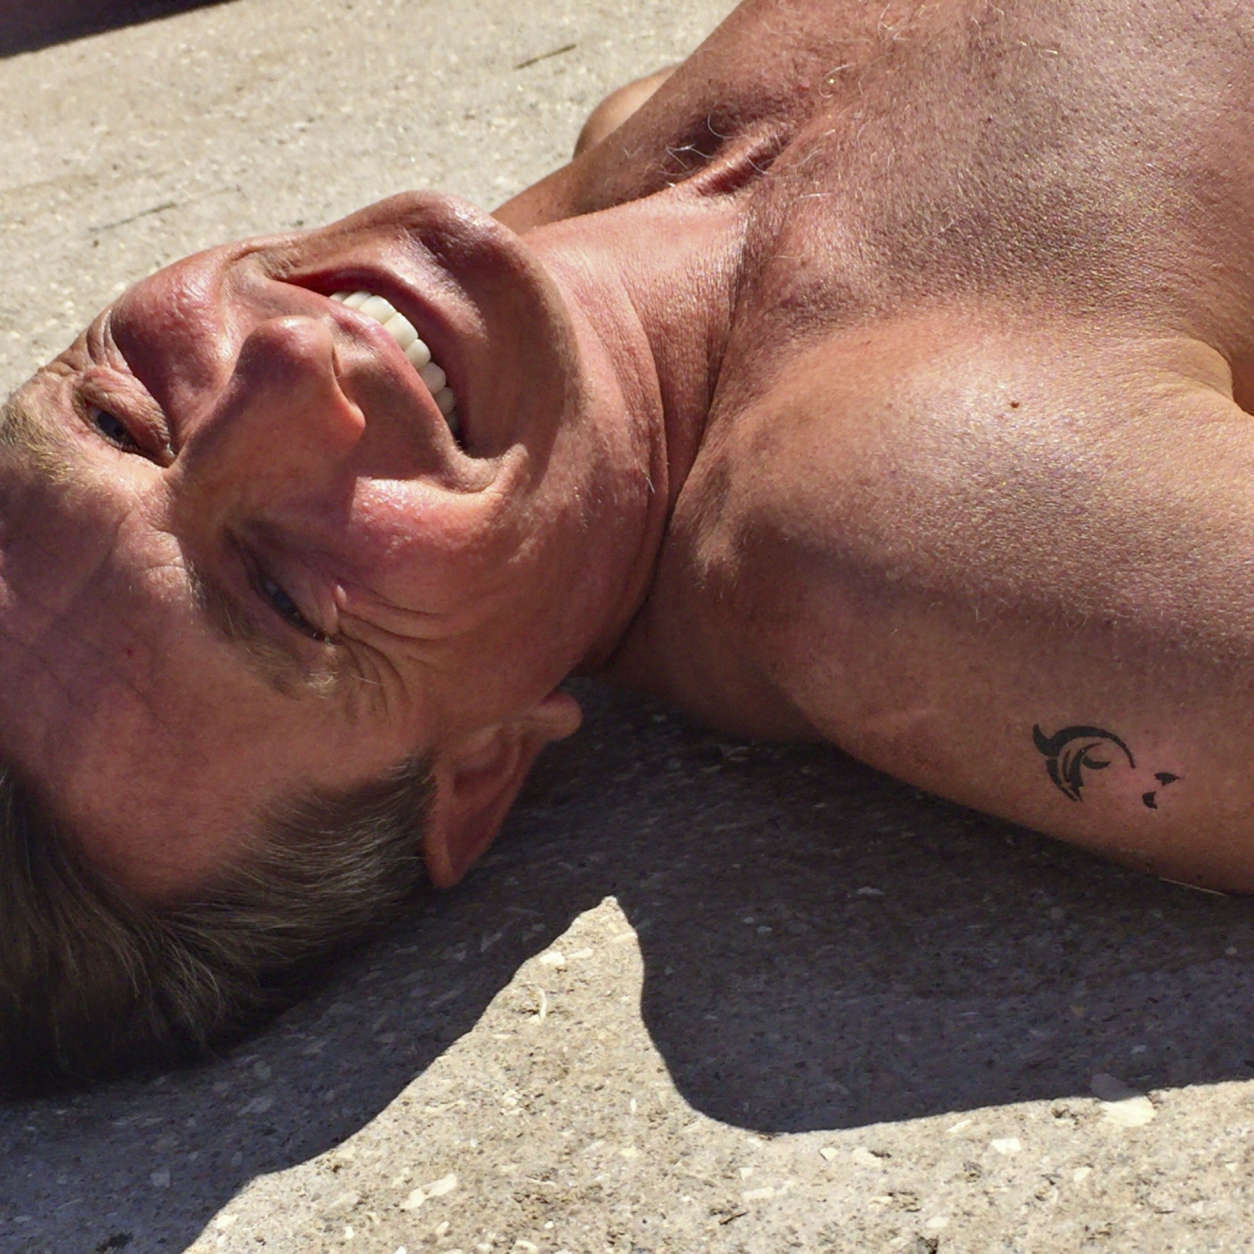 In this undated photo provided by the Office of the Slovenia's president and used on president's Instagram, Slovenia's president Borut Pahor, enjoys sunbathing on a beach in Pacug, Slovenia. Donald Trump may rule Twitter, but he's no match for his Slovenian counterpart on Instagram as Slovenia's president Borut Pahor has been actively using social media to get his message across since 2012. (Petra Arsic/Office of the Slovenia's President via AP)